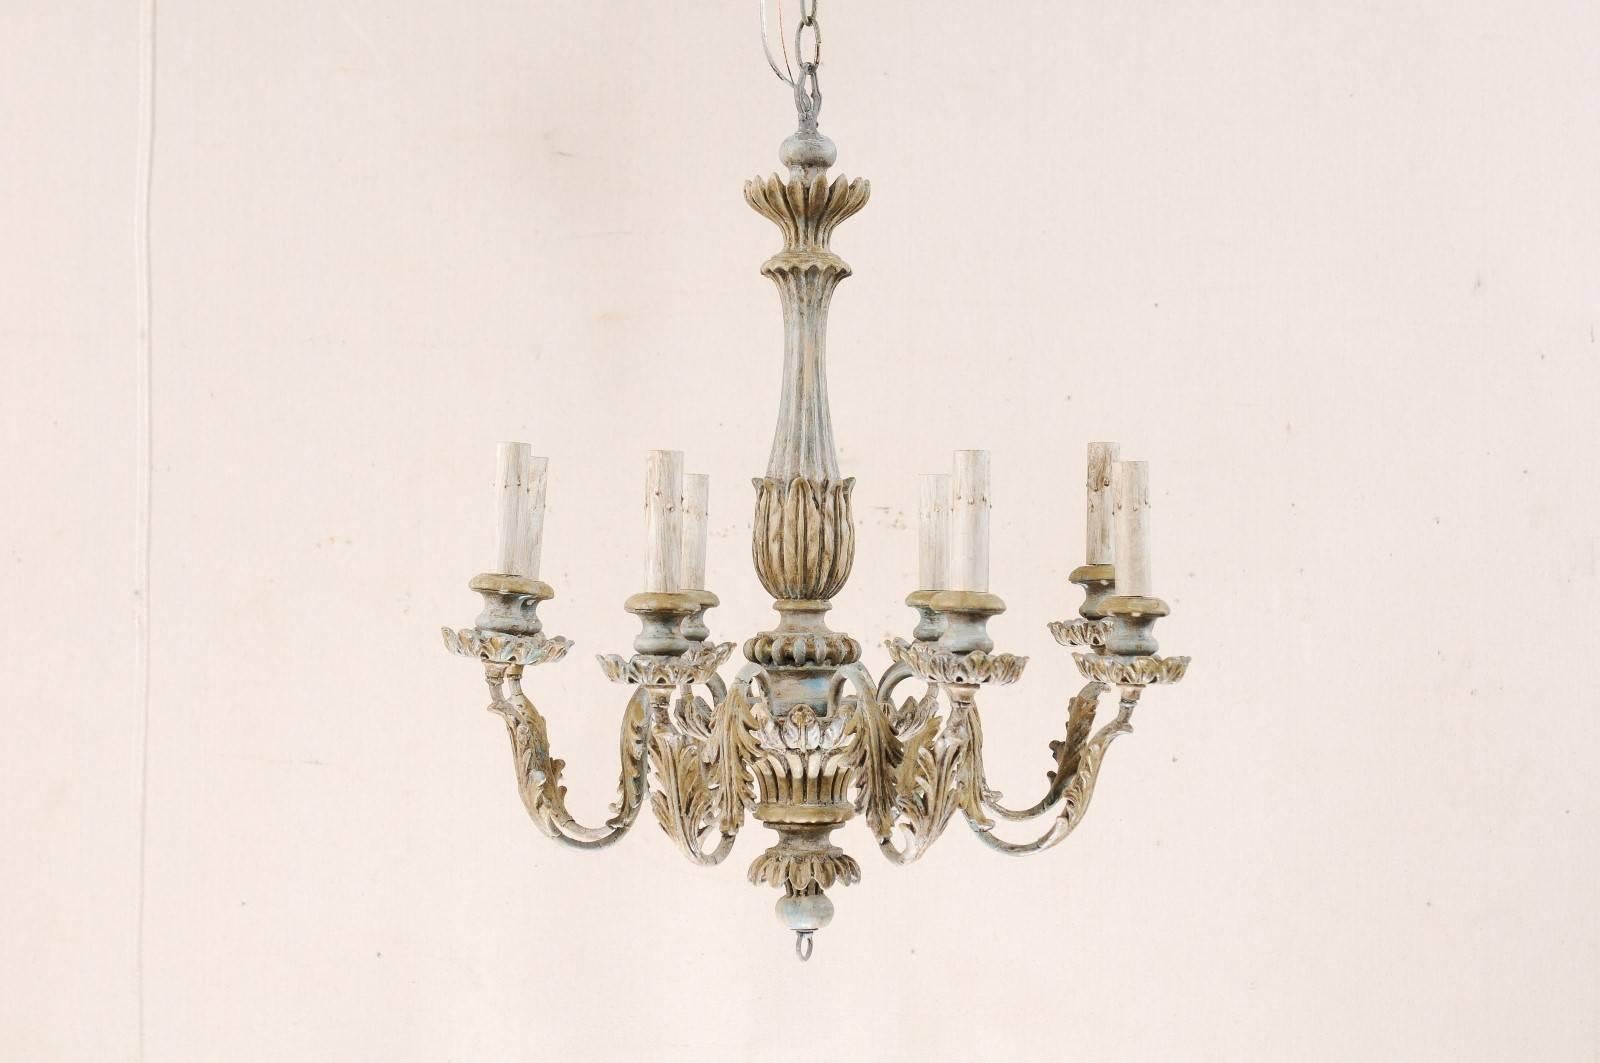 A French eight-light painted wooden chandelier from the mid-20th century. This French chandelier has carved central column with wrapped leaf carvings and fluting details, bottom ring finial, and lovely scrolled metal arms that are decorated with